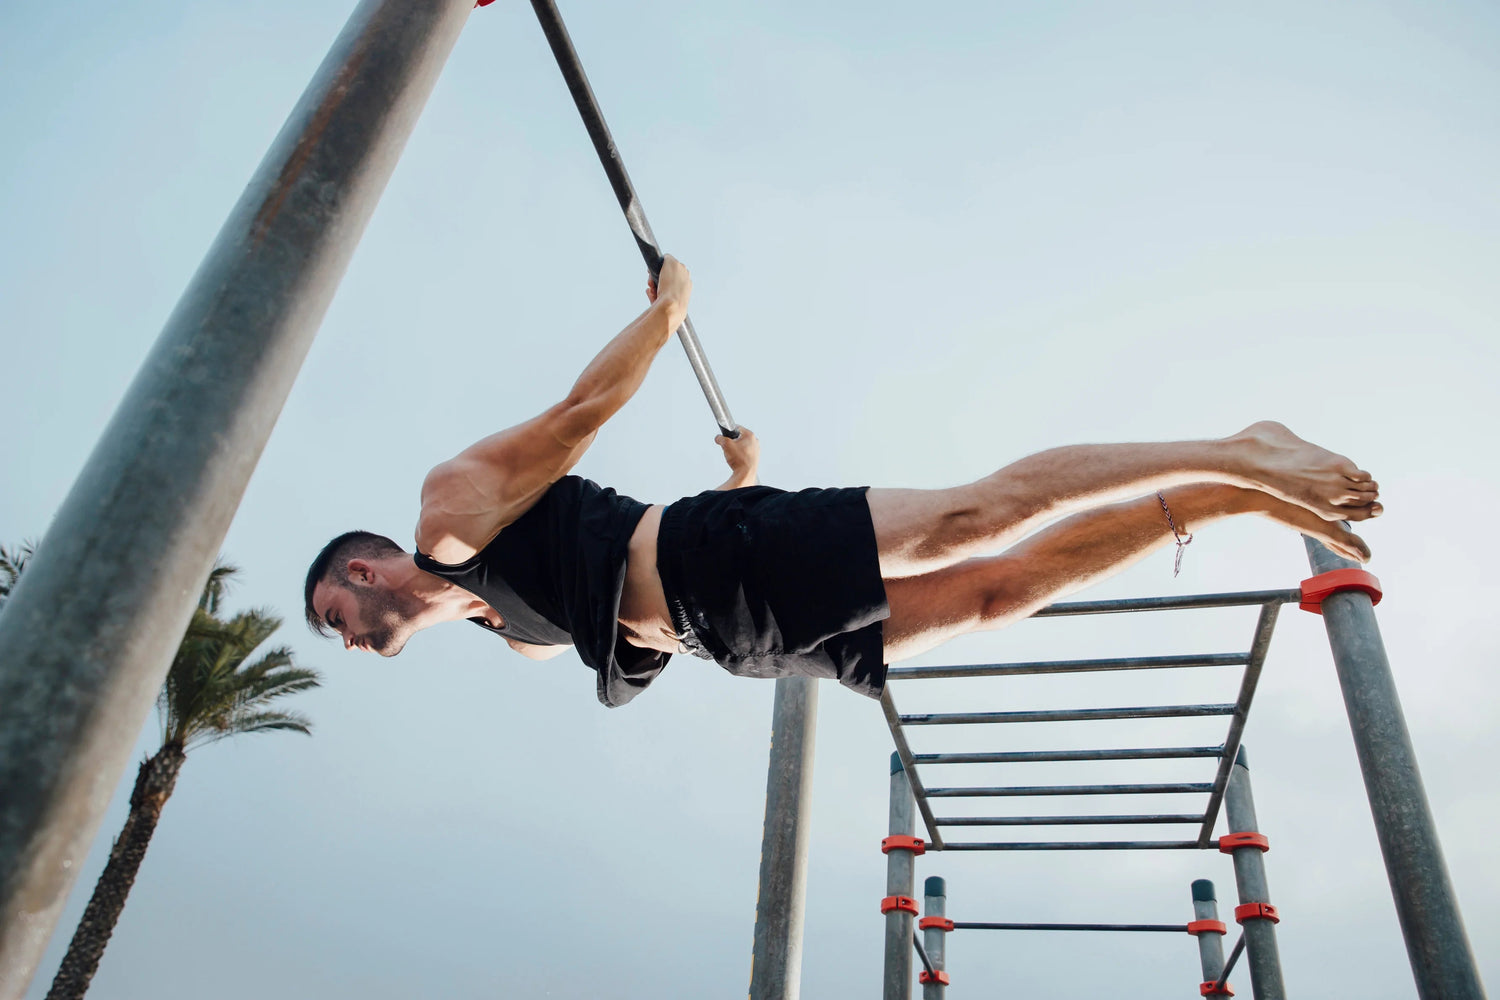 7 Best Calisthenics Exercises For Unbelievable Body Transformation - Gripzilla - The Best Grip and Forearm Strength Exercises, Arm Wrestling Tools, Hand Grippers to Improve Grip Strength